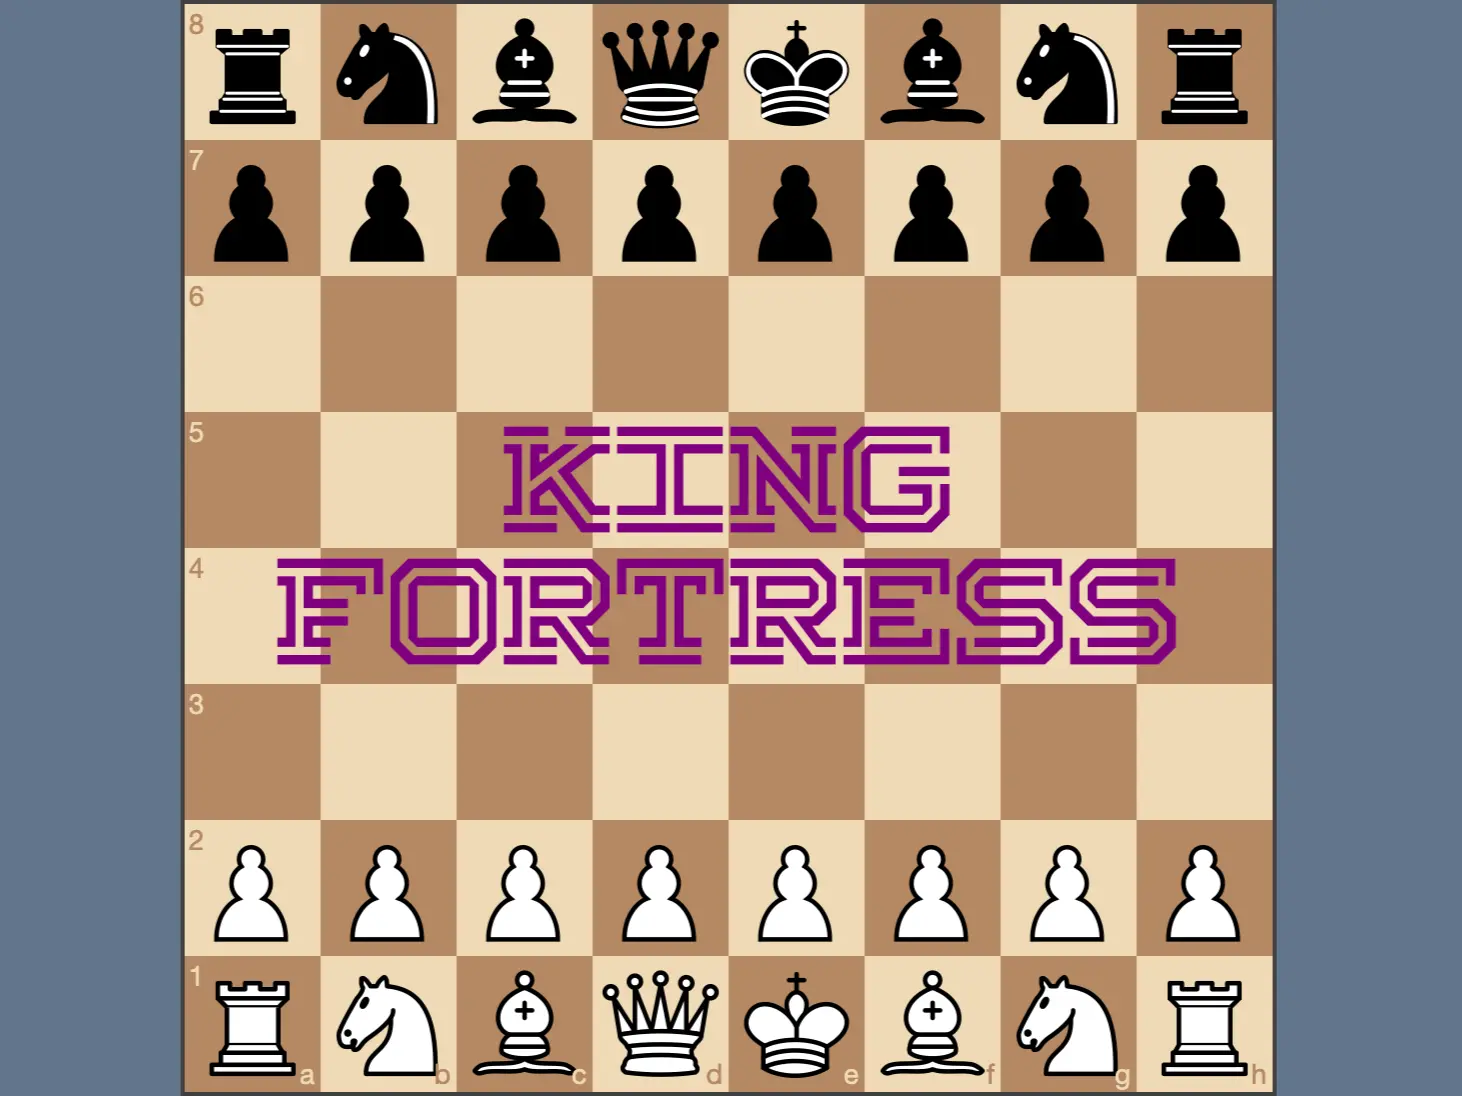 "King Fortress" logo over chess board